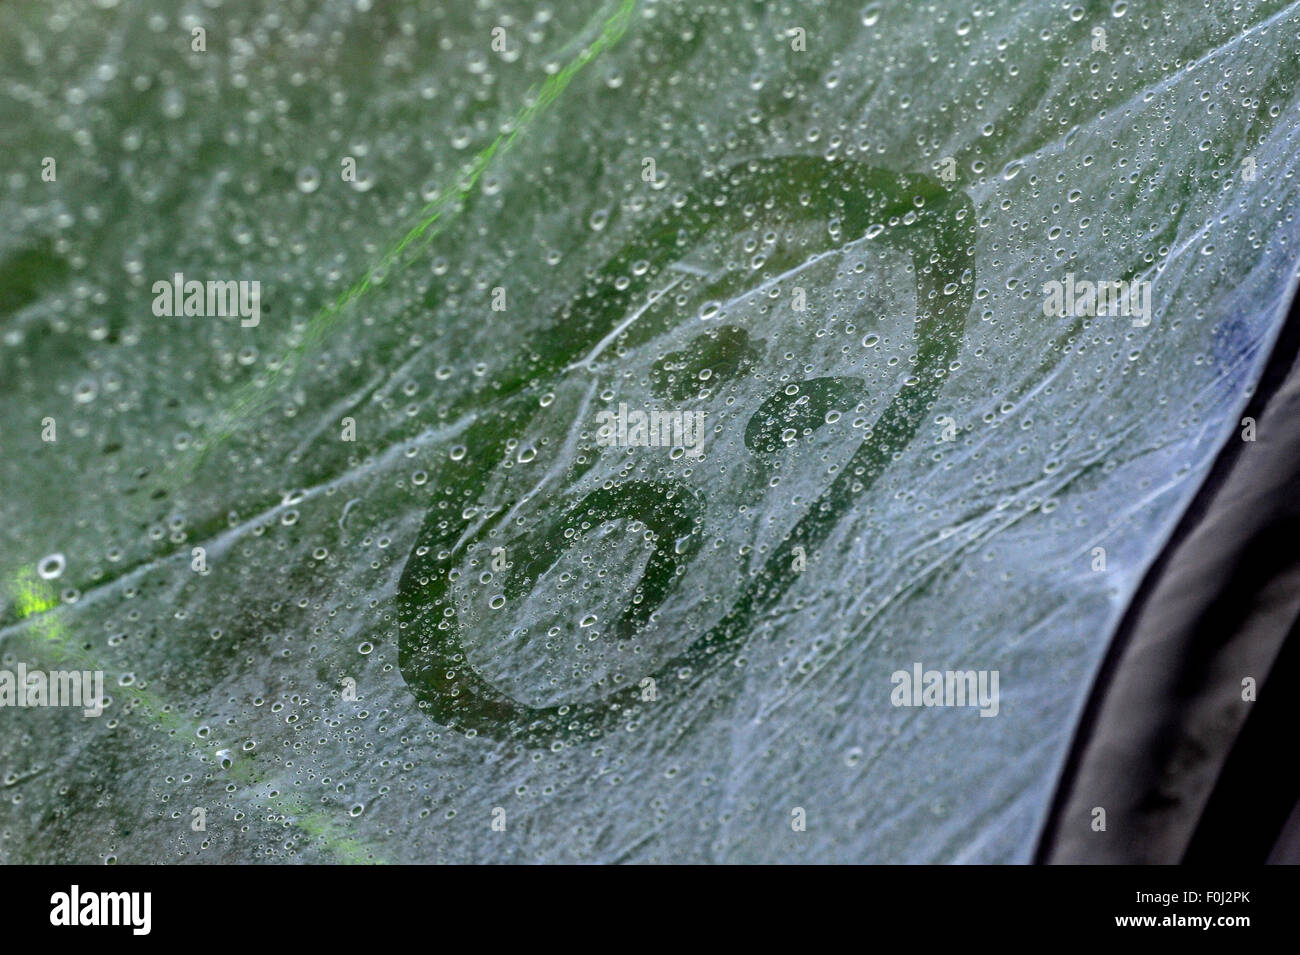 Words written in the condensation on a tent canvas Stock Photo - Alamy